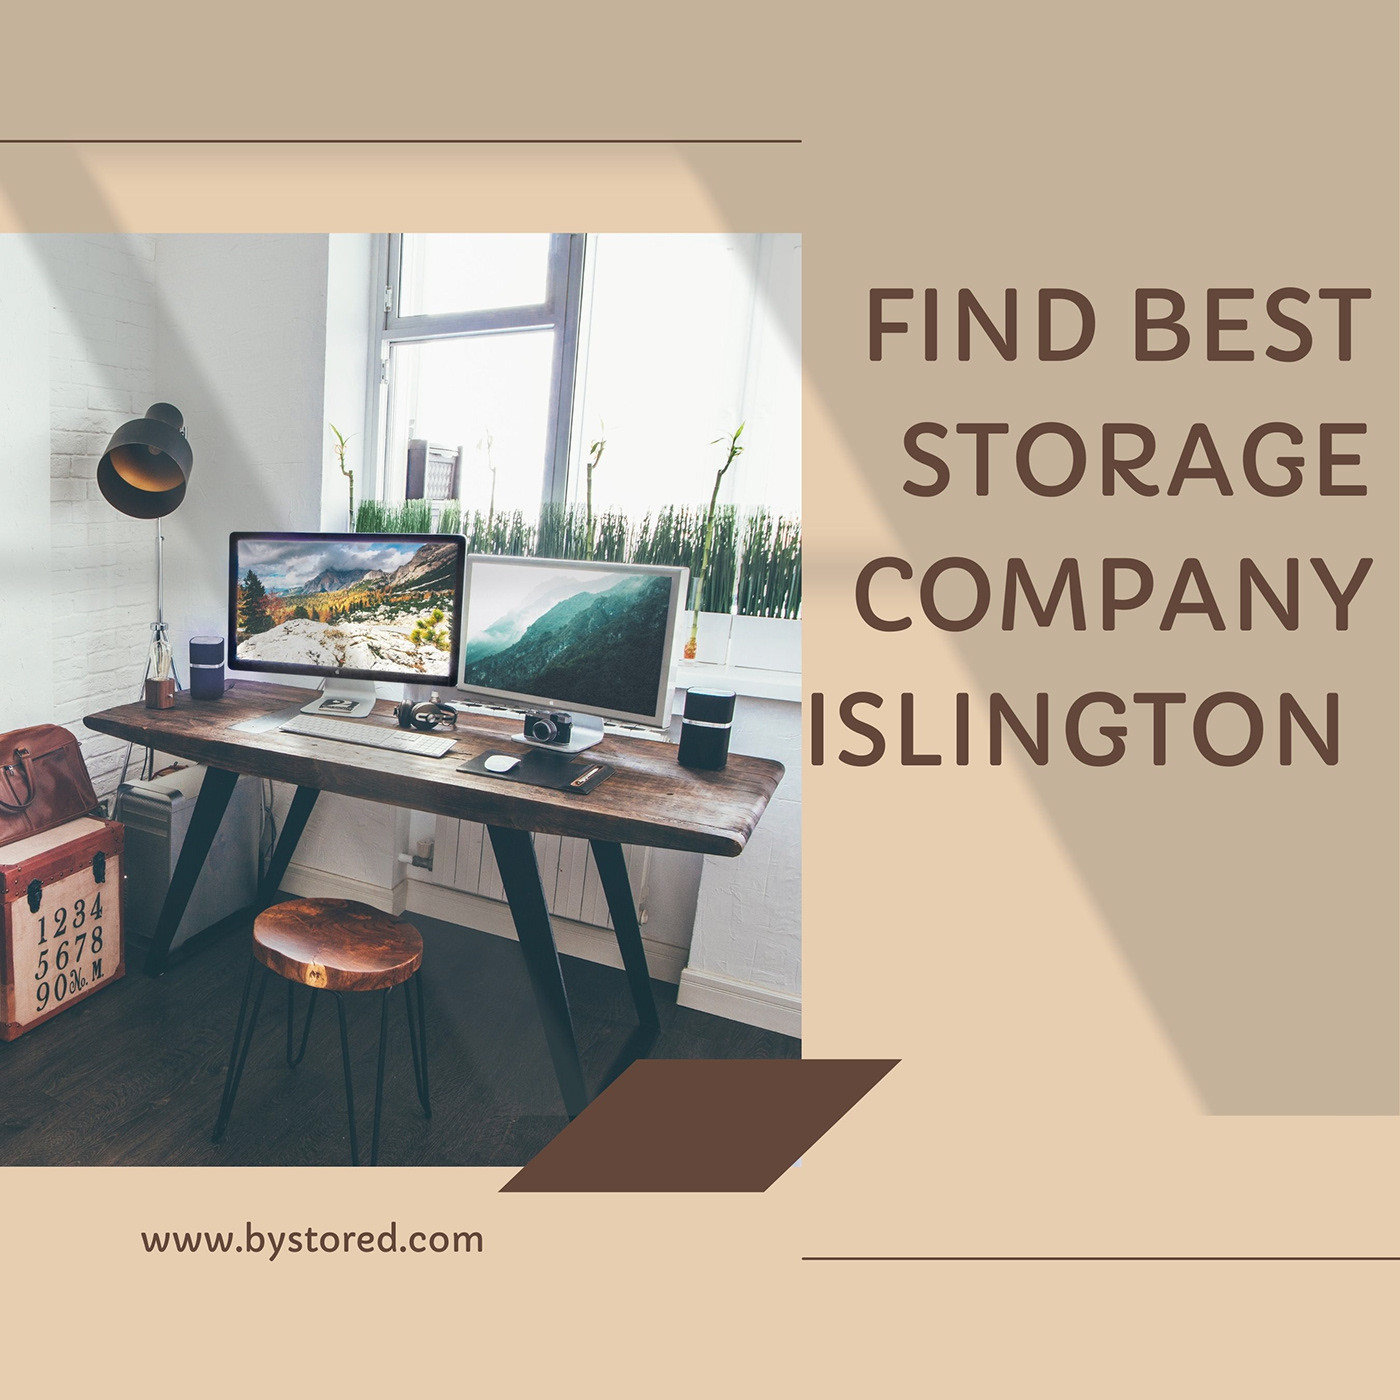 How to Find Best Storage Company in Islington